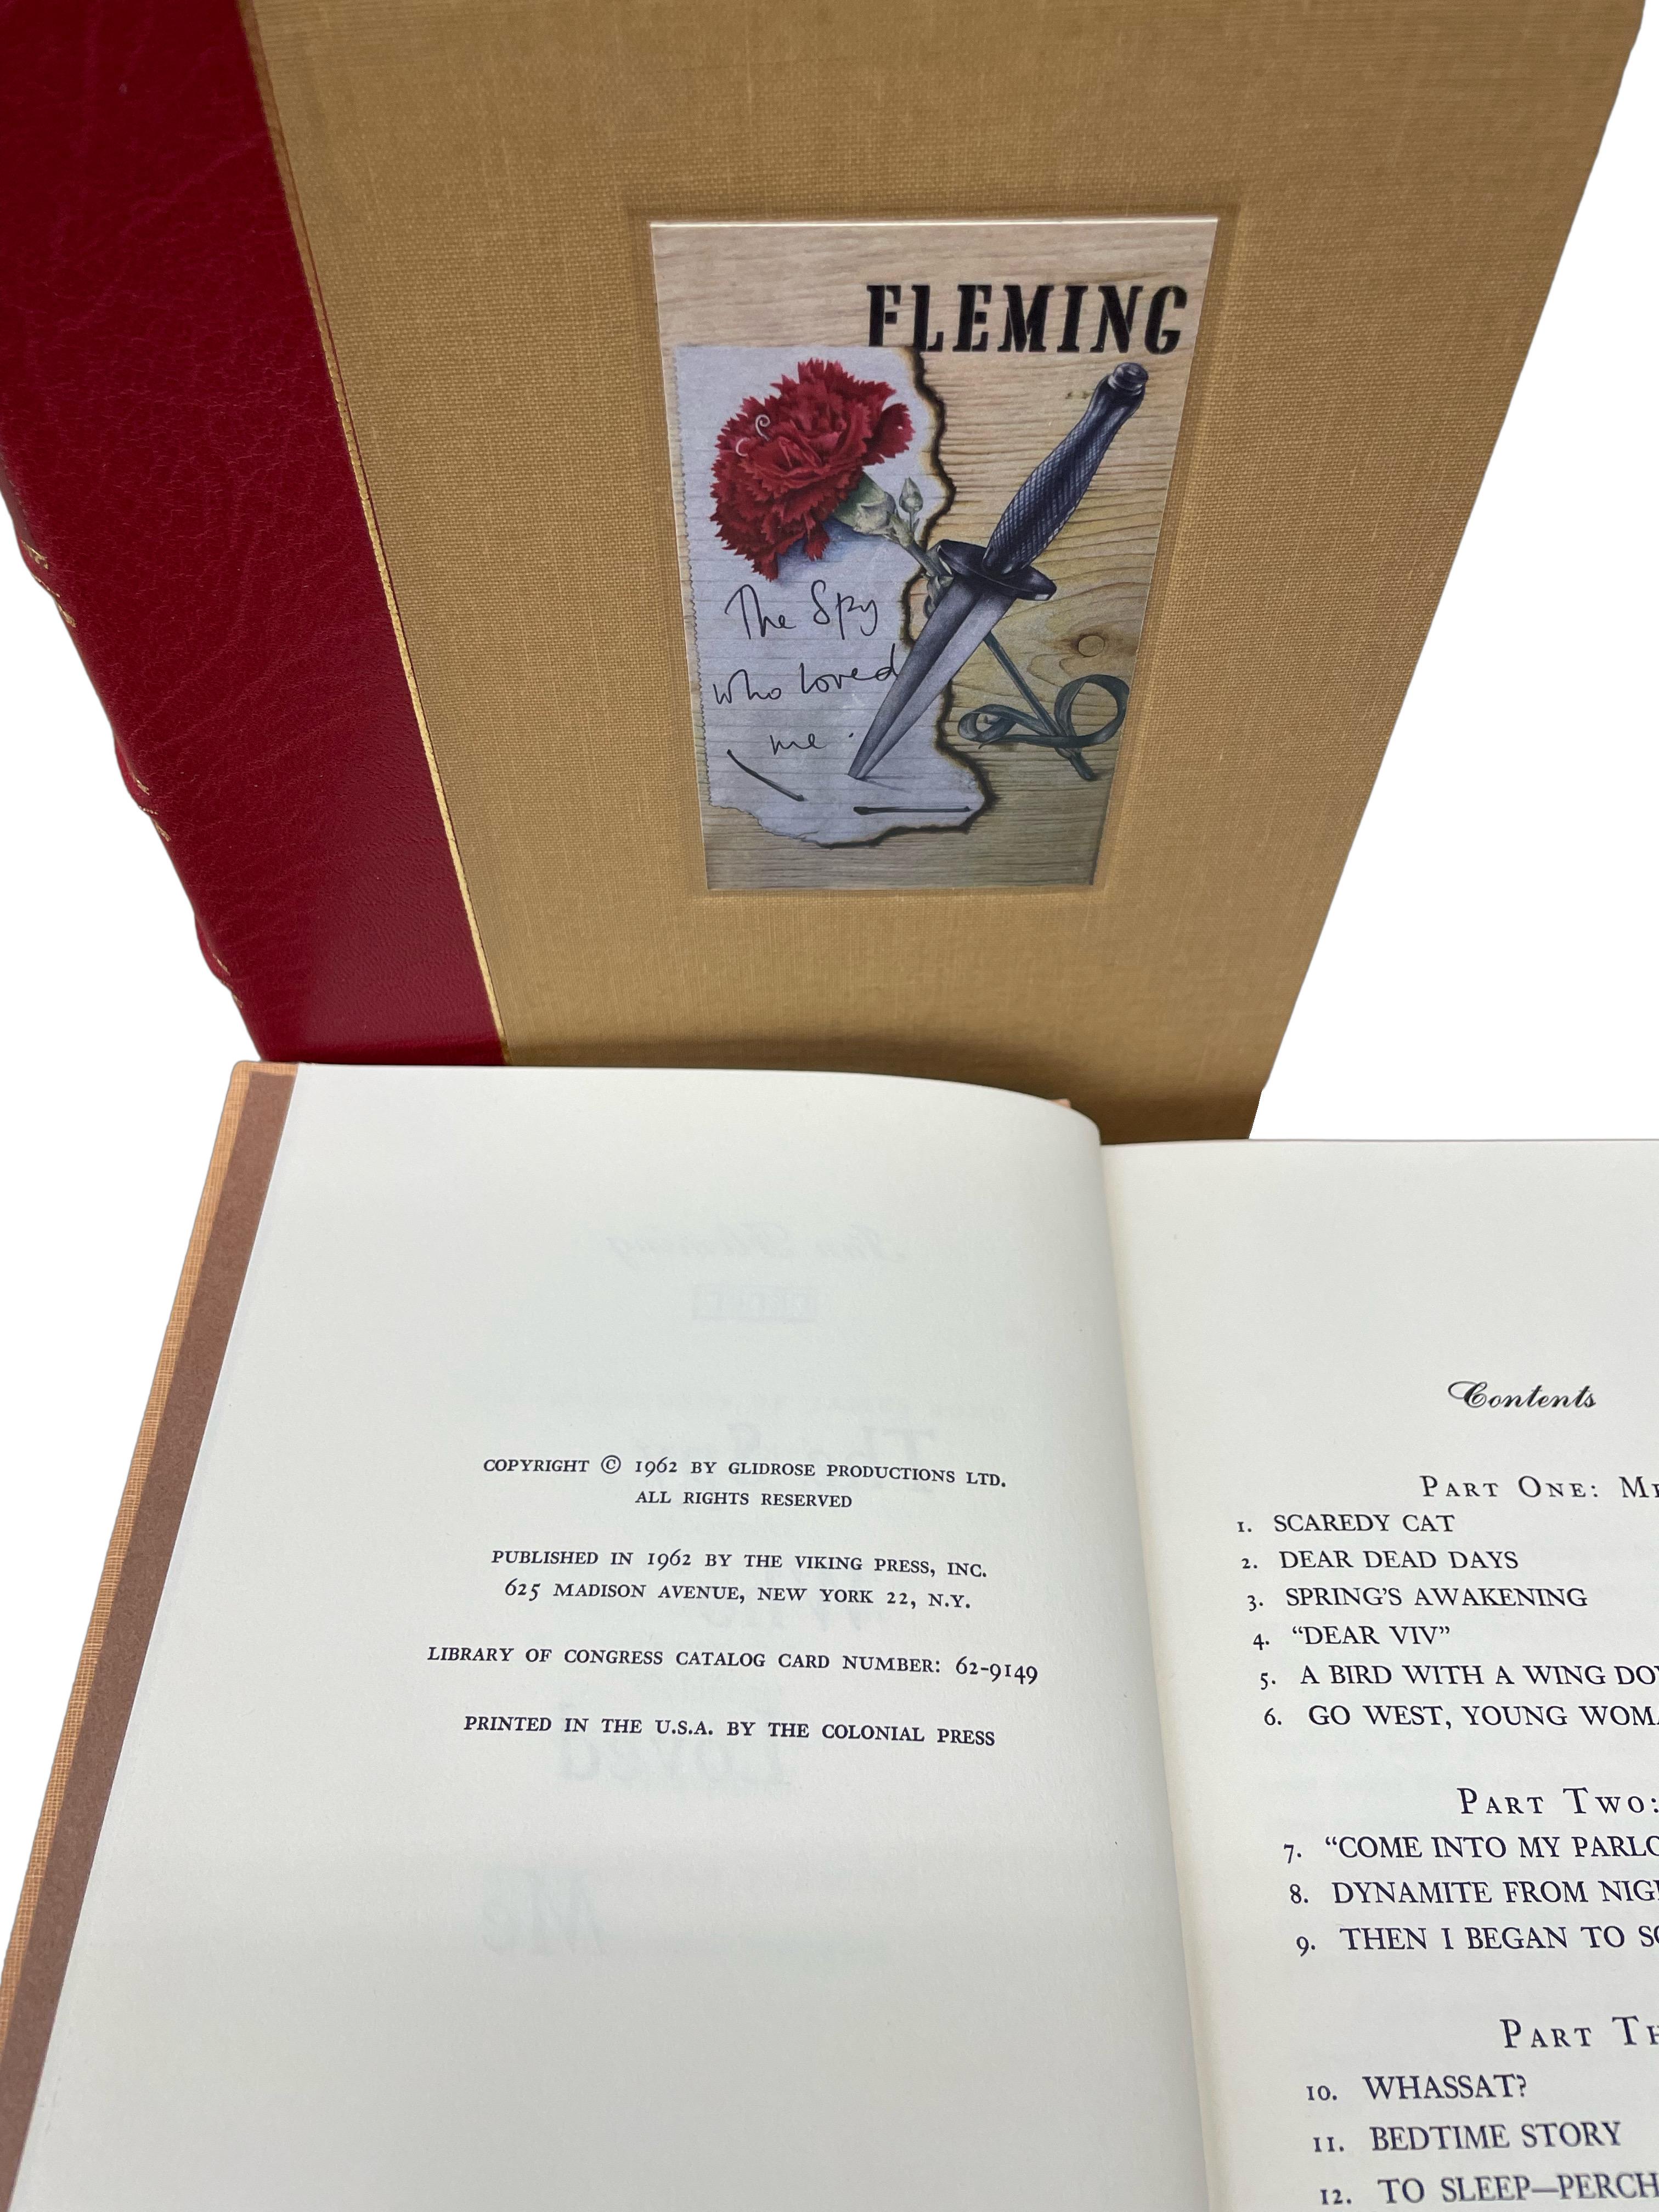 Fleming, Ian. The Spy Who Loved Me. New York: The Viking Press, Inc., 1962. First US edition, first printing. Octavo. Presented in the publisher's original dust jacket and original cloth boards. With new archival quarter leather and cloth clamshell